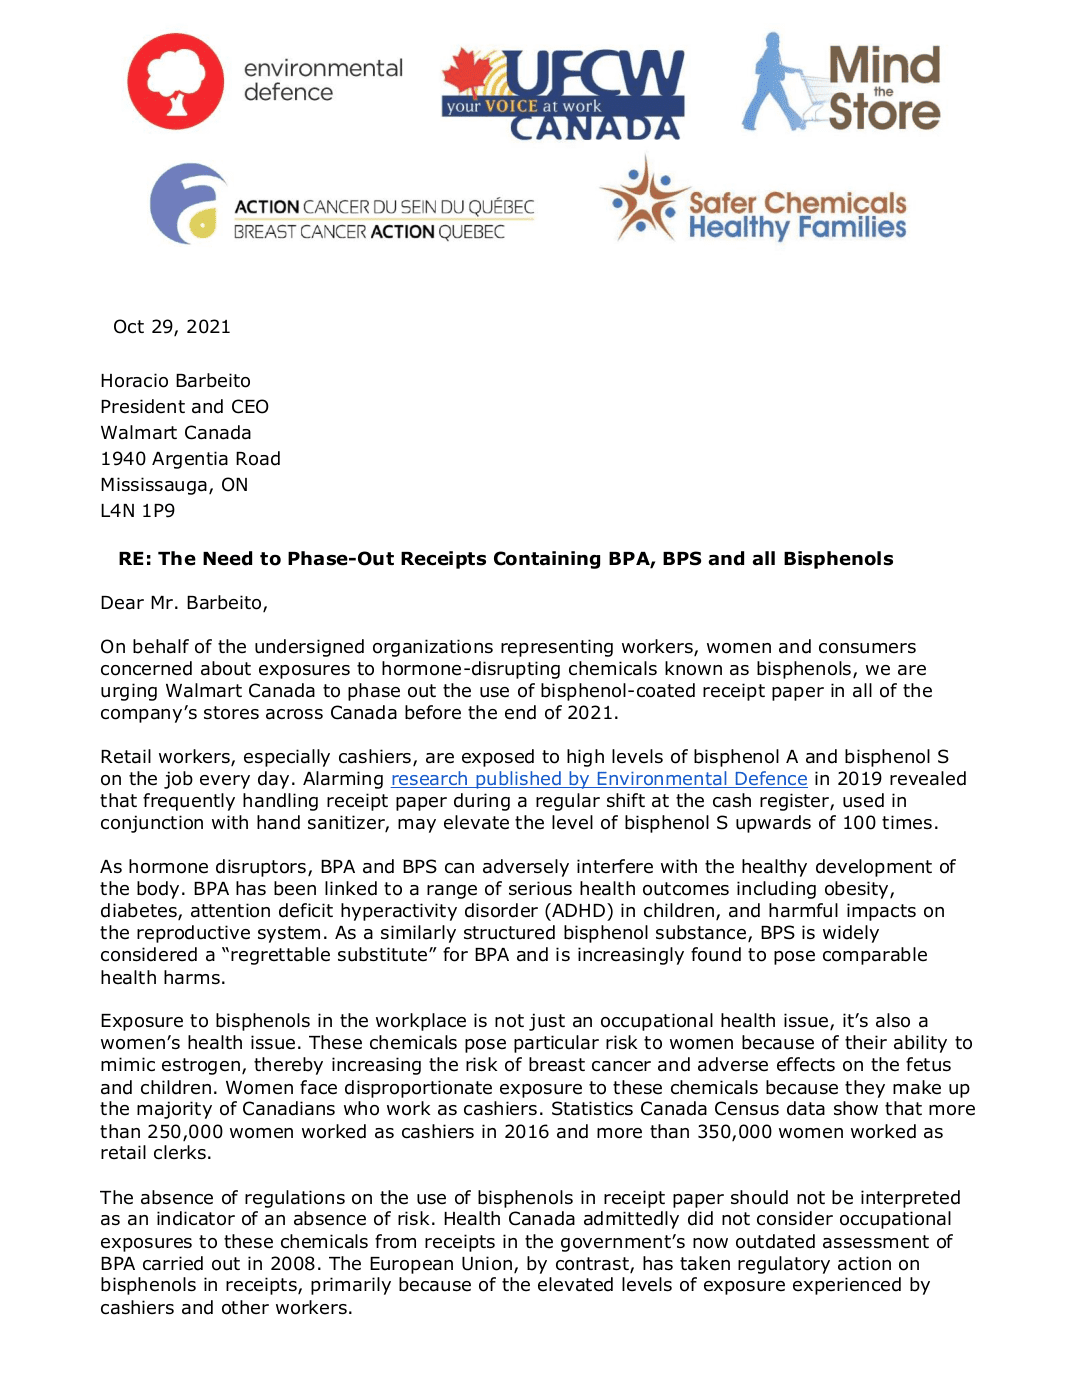 https://environmentaldefence.ca/wp-content/uploads/2021/11/letter.png